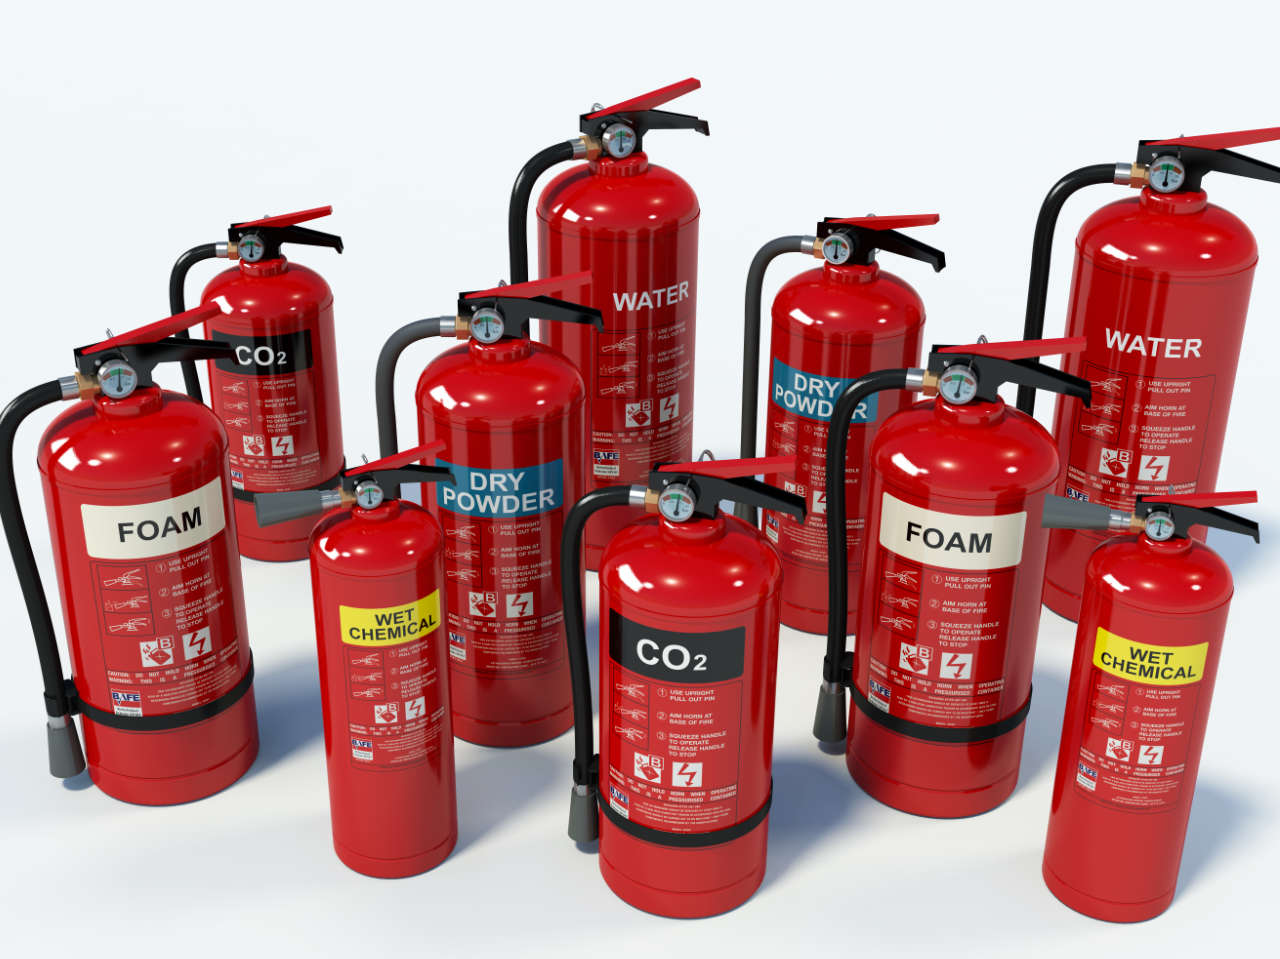 http://praxis42.com/wp-content/uploads/2022/03/different-types-of-fire-extinguisher-1.jpg